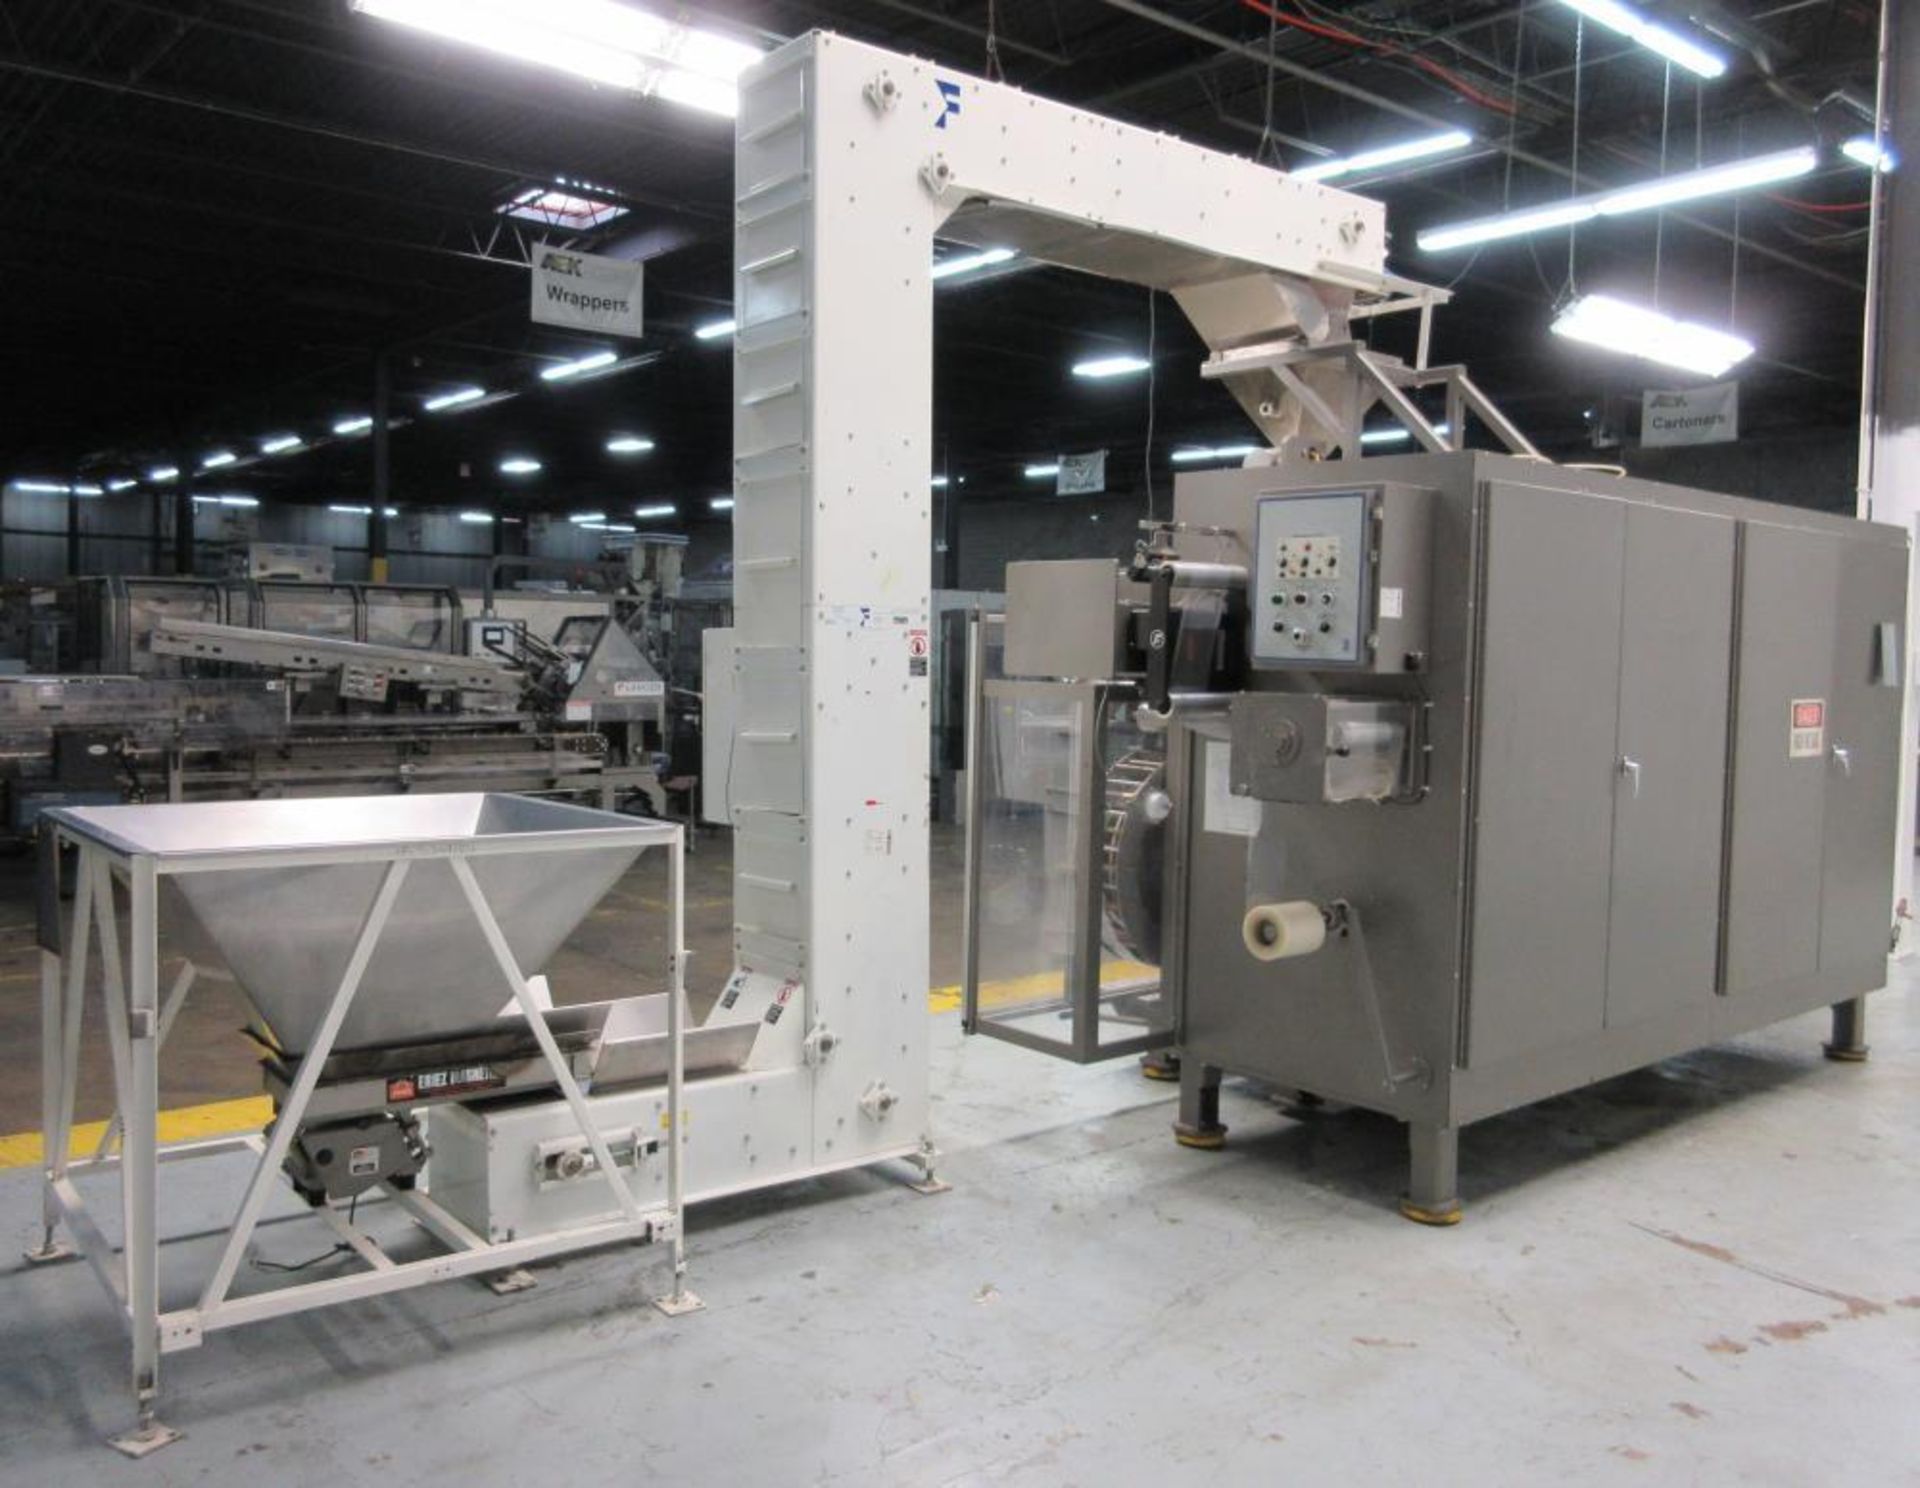 Ropak Model V High-Speed Rotary Pouch Machine with Volumetric Screw Product Feeder - Image 3 of 30